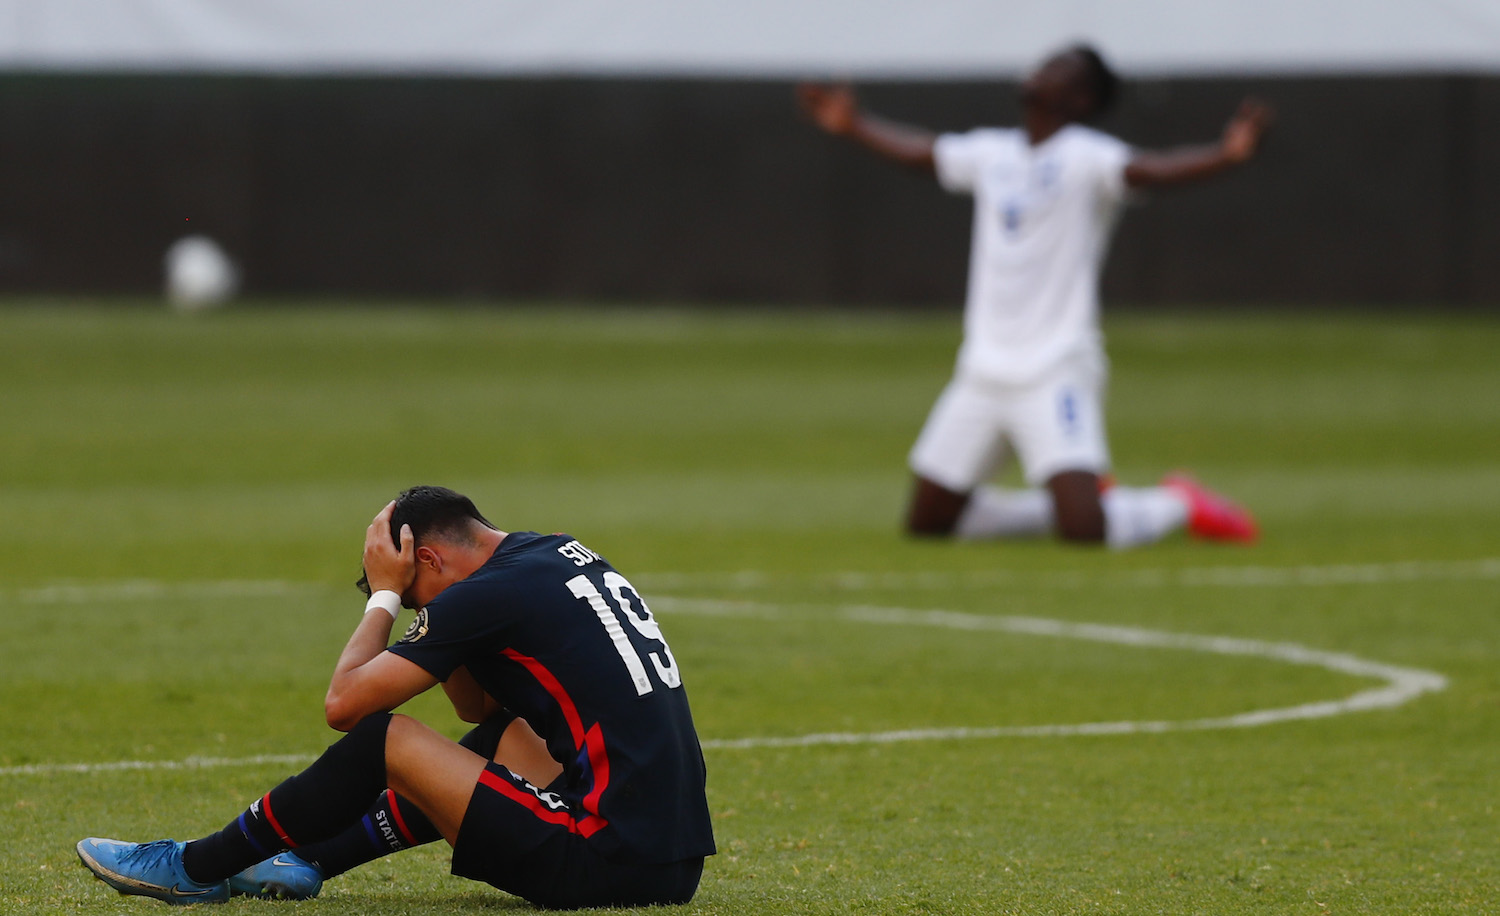 GUADALAJARA, MEXICO - MARCH 28: Sebastian Soto #19 of United States reacts after losing the semifinals match between Honduras and USA as part of the 2020 Concacaf Men's Olympic Qualifying at Jalisco Stadium on March 28, 2021 in Guadalajara, Mexico. (Photo by Refugio Ruiz/Getty Images)